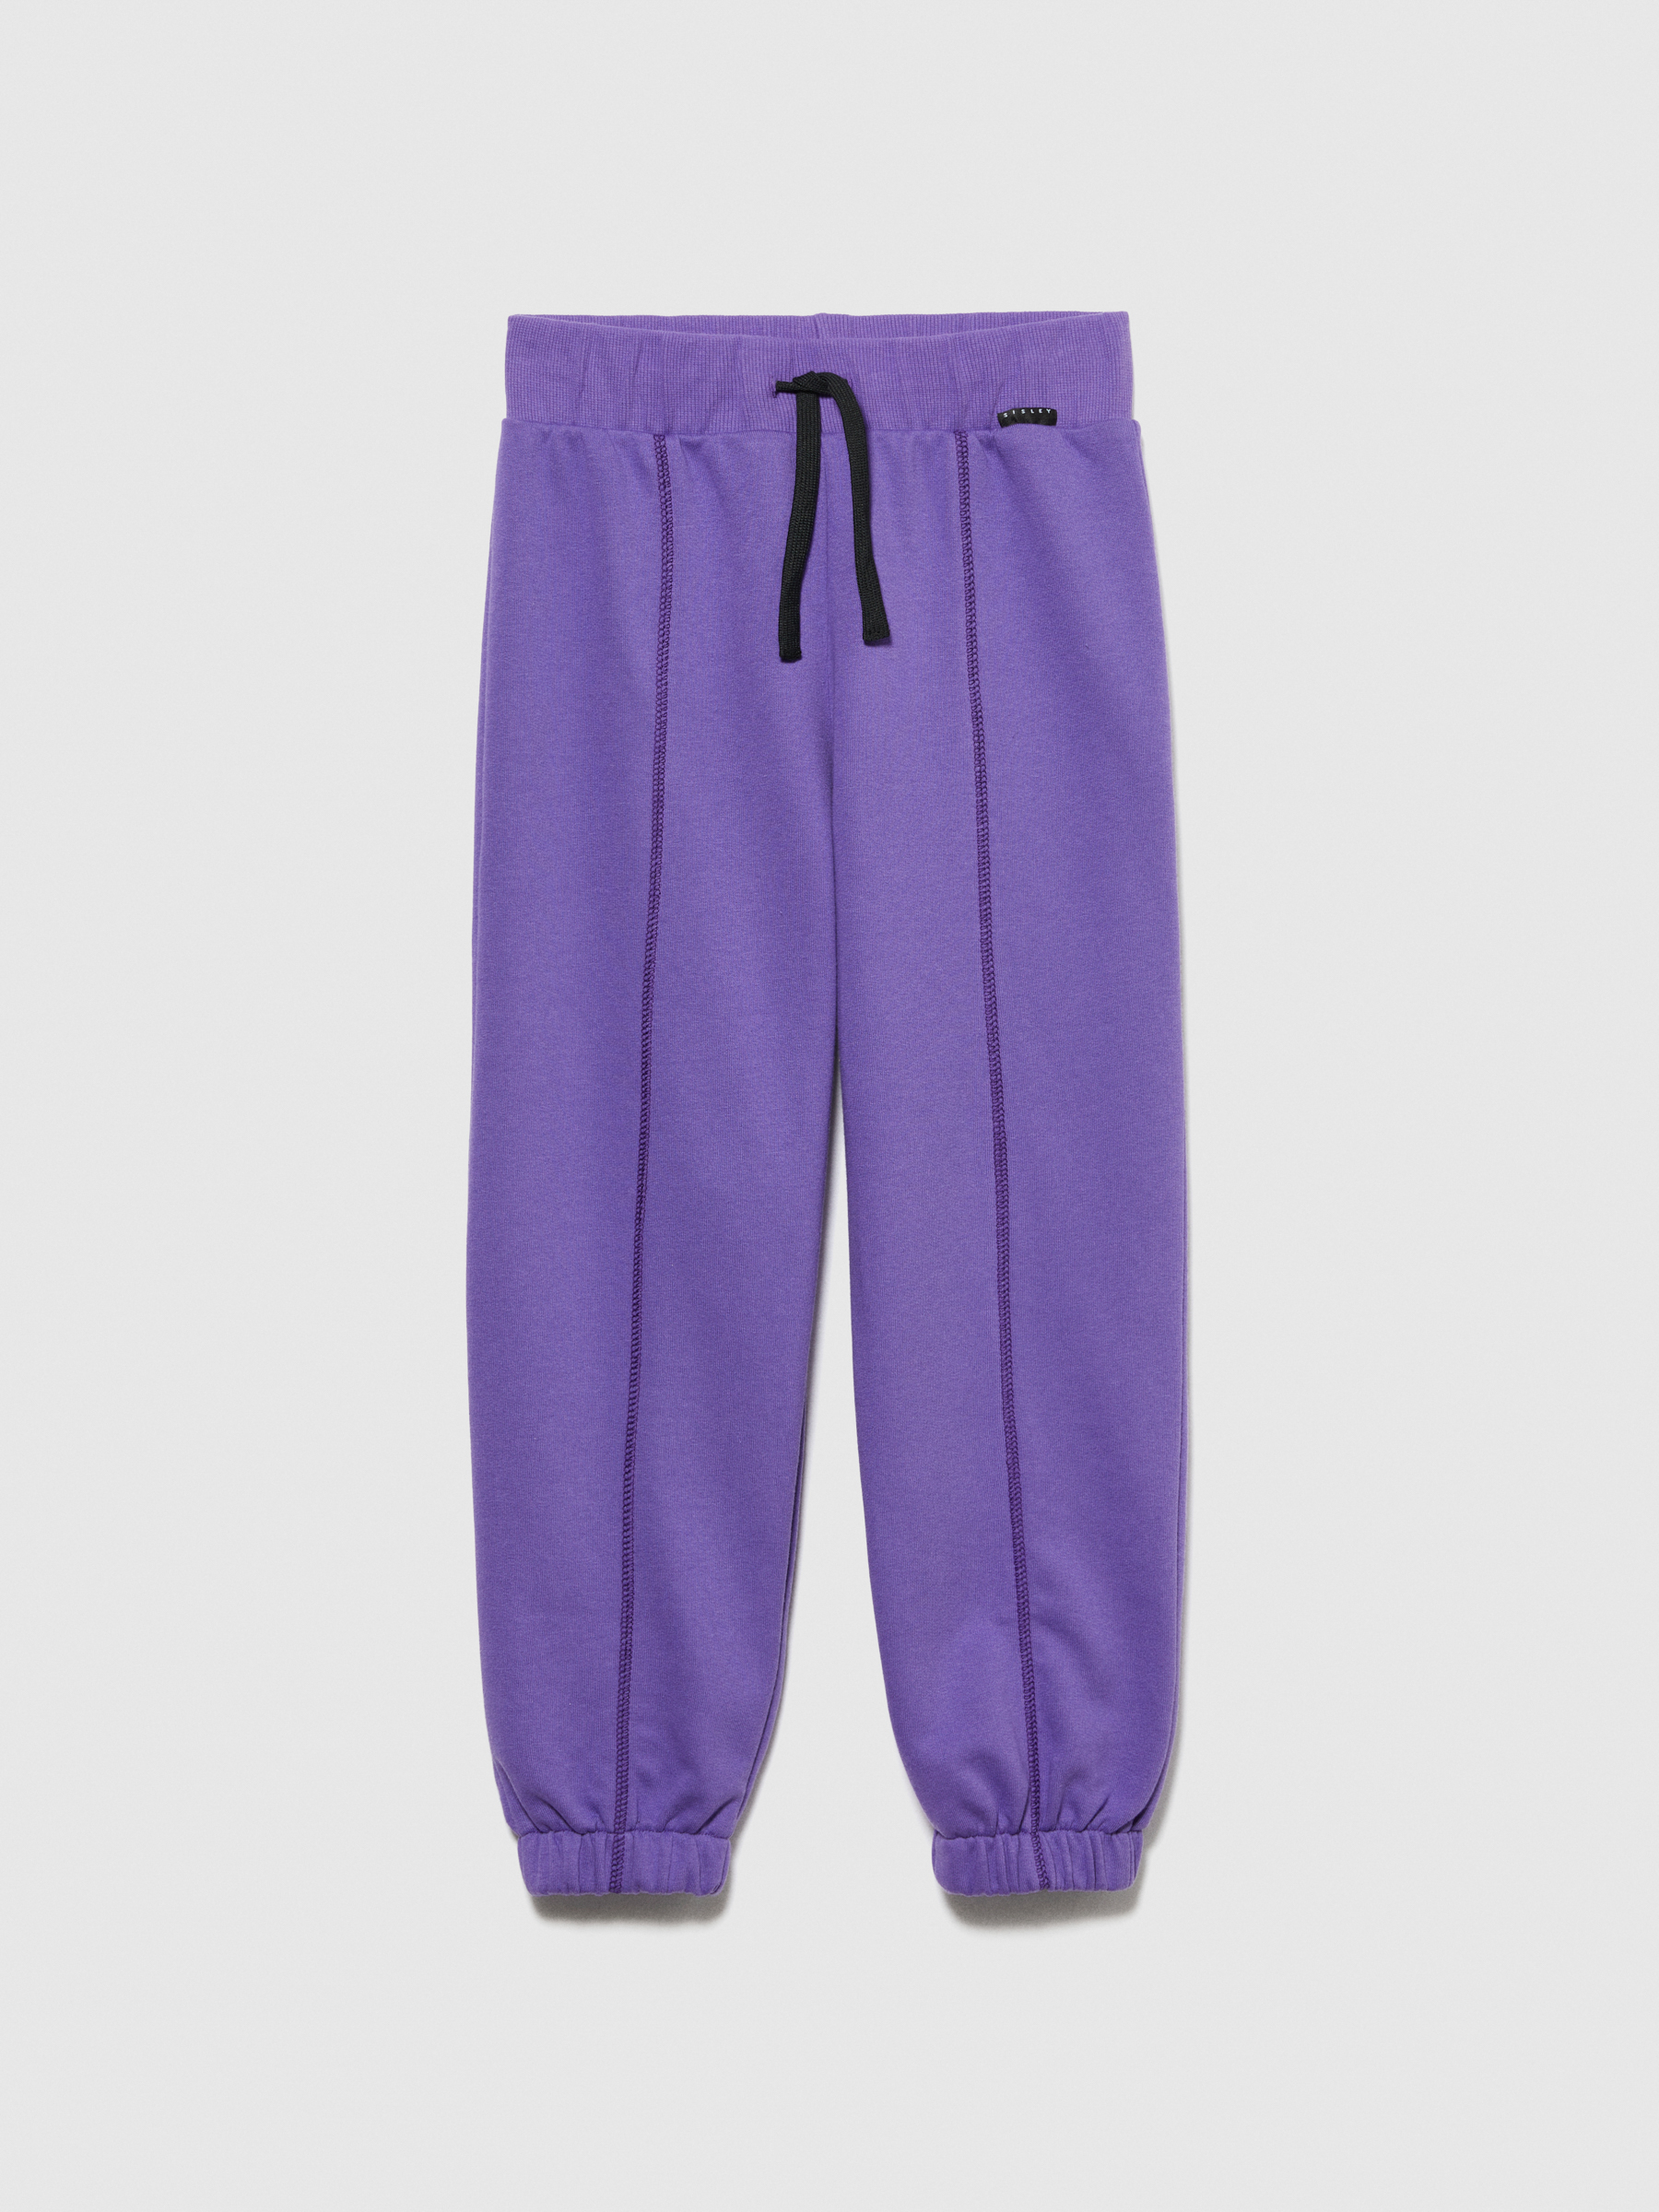 Sisley Young - Oversized Fit Joggers, Woman, Violet, Size: M